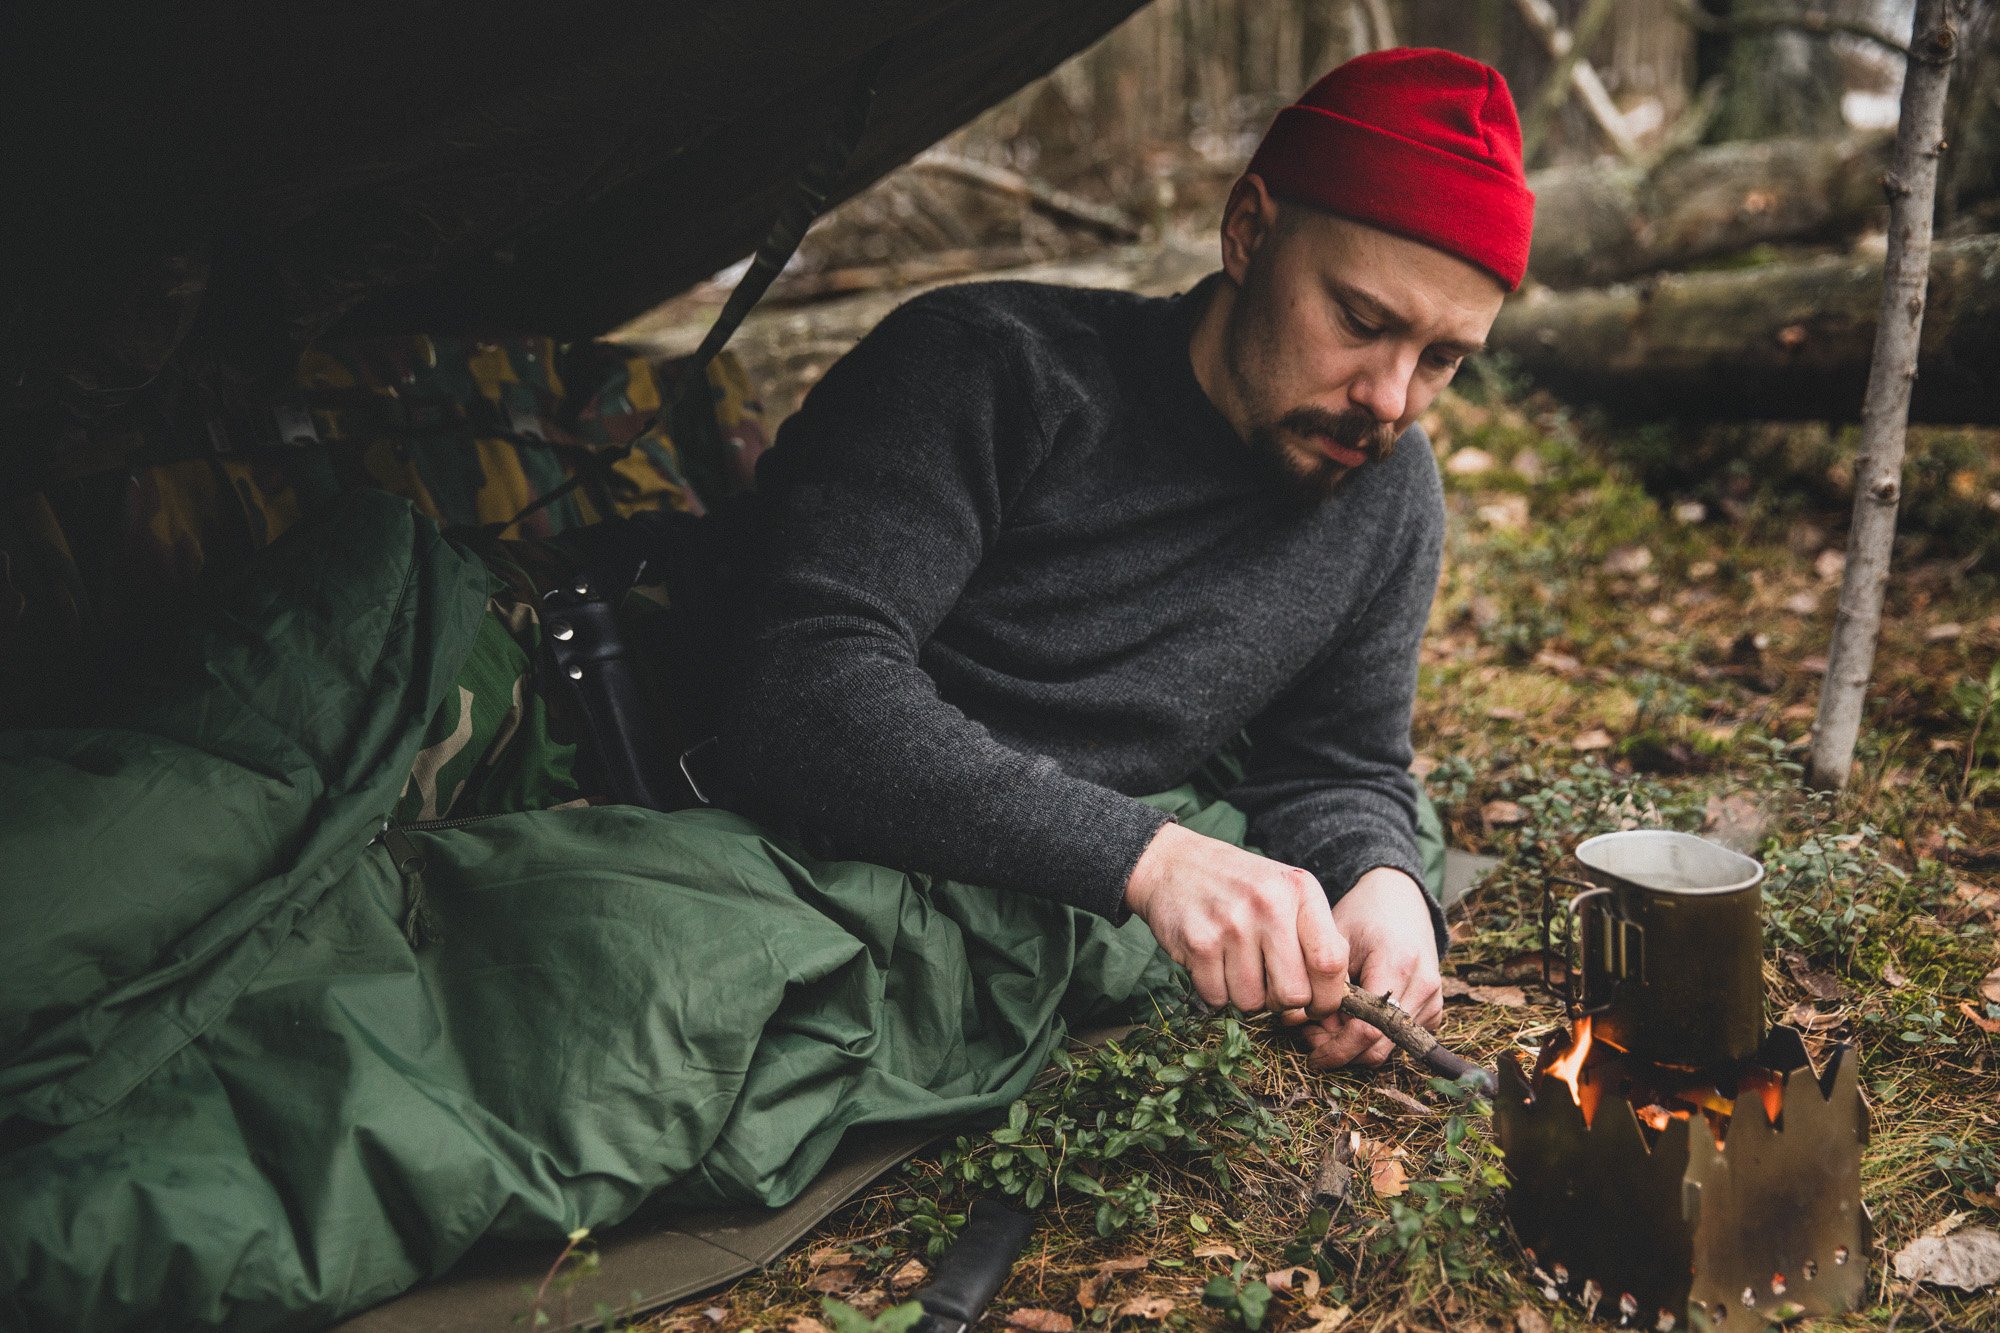 A man half in a sleeping bag lying in the forest under an awning feeding a stick into a twig stove.